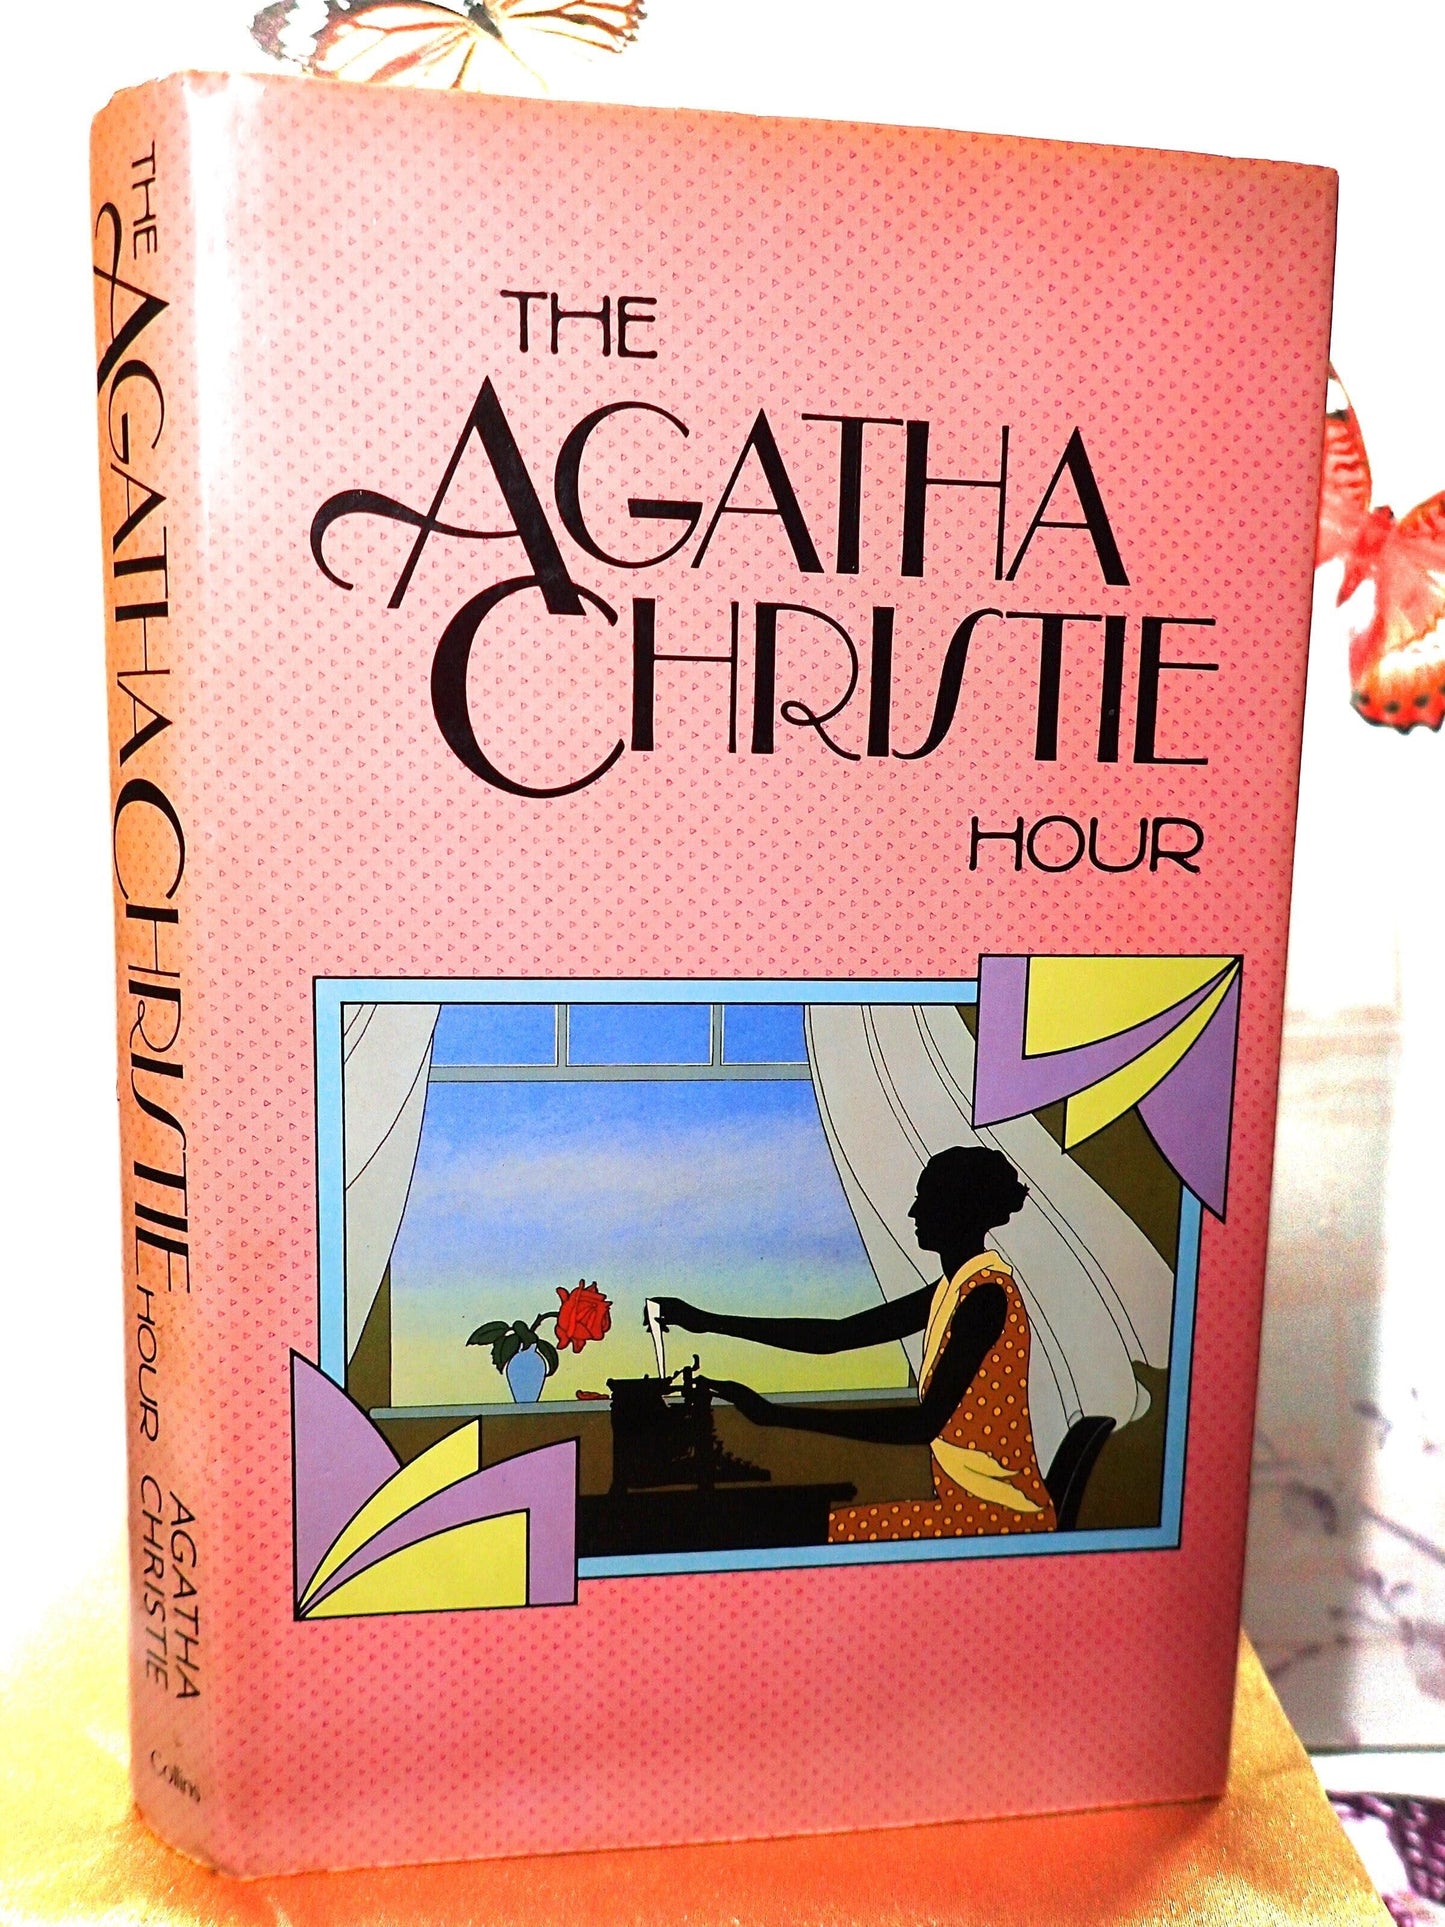 The Agatha Christie Hour First Edition Collins 1982 Vintage Book of Short Stories